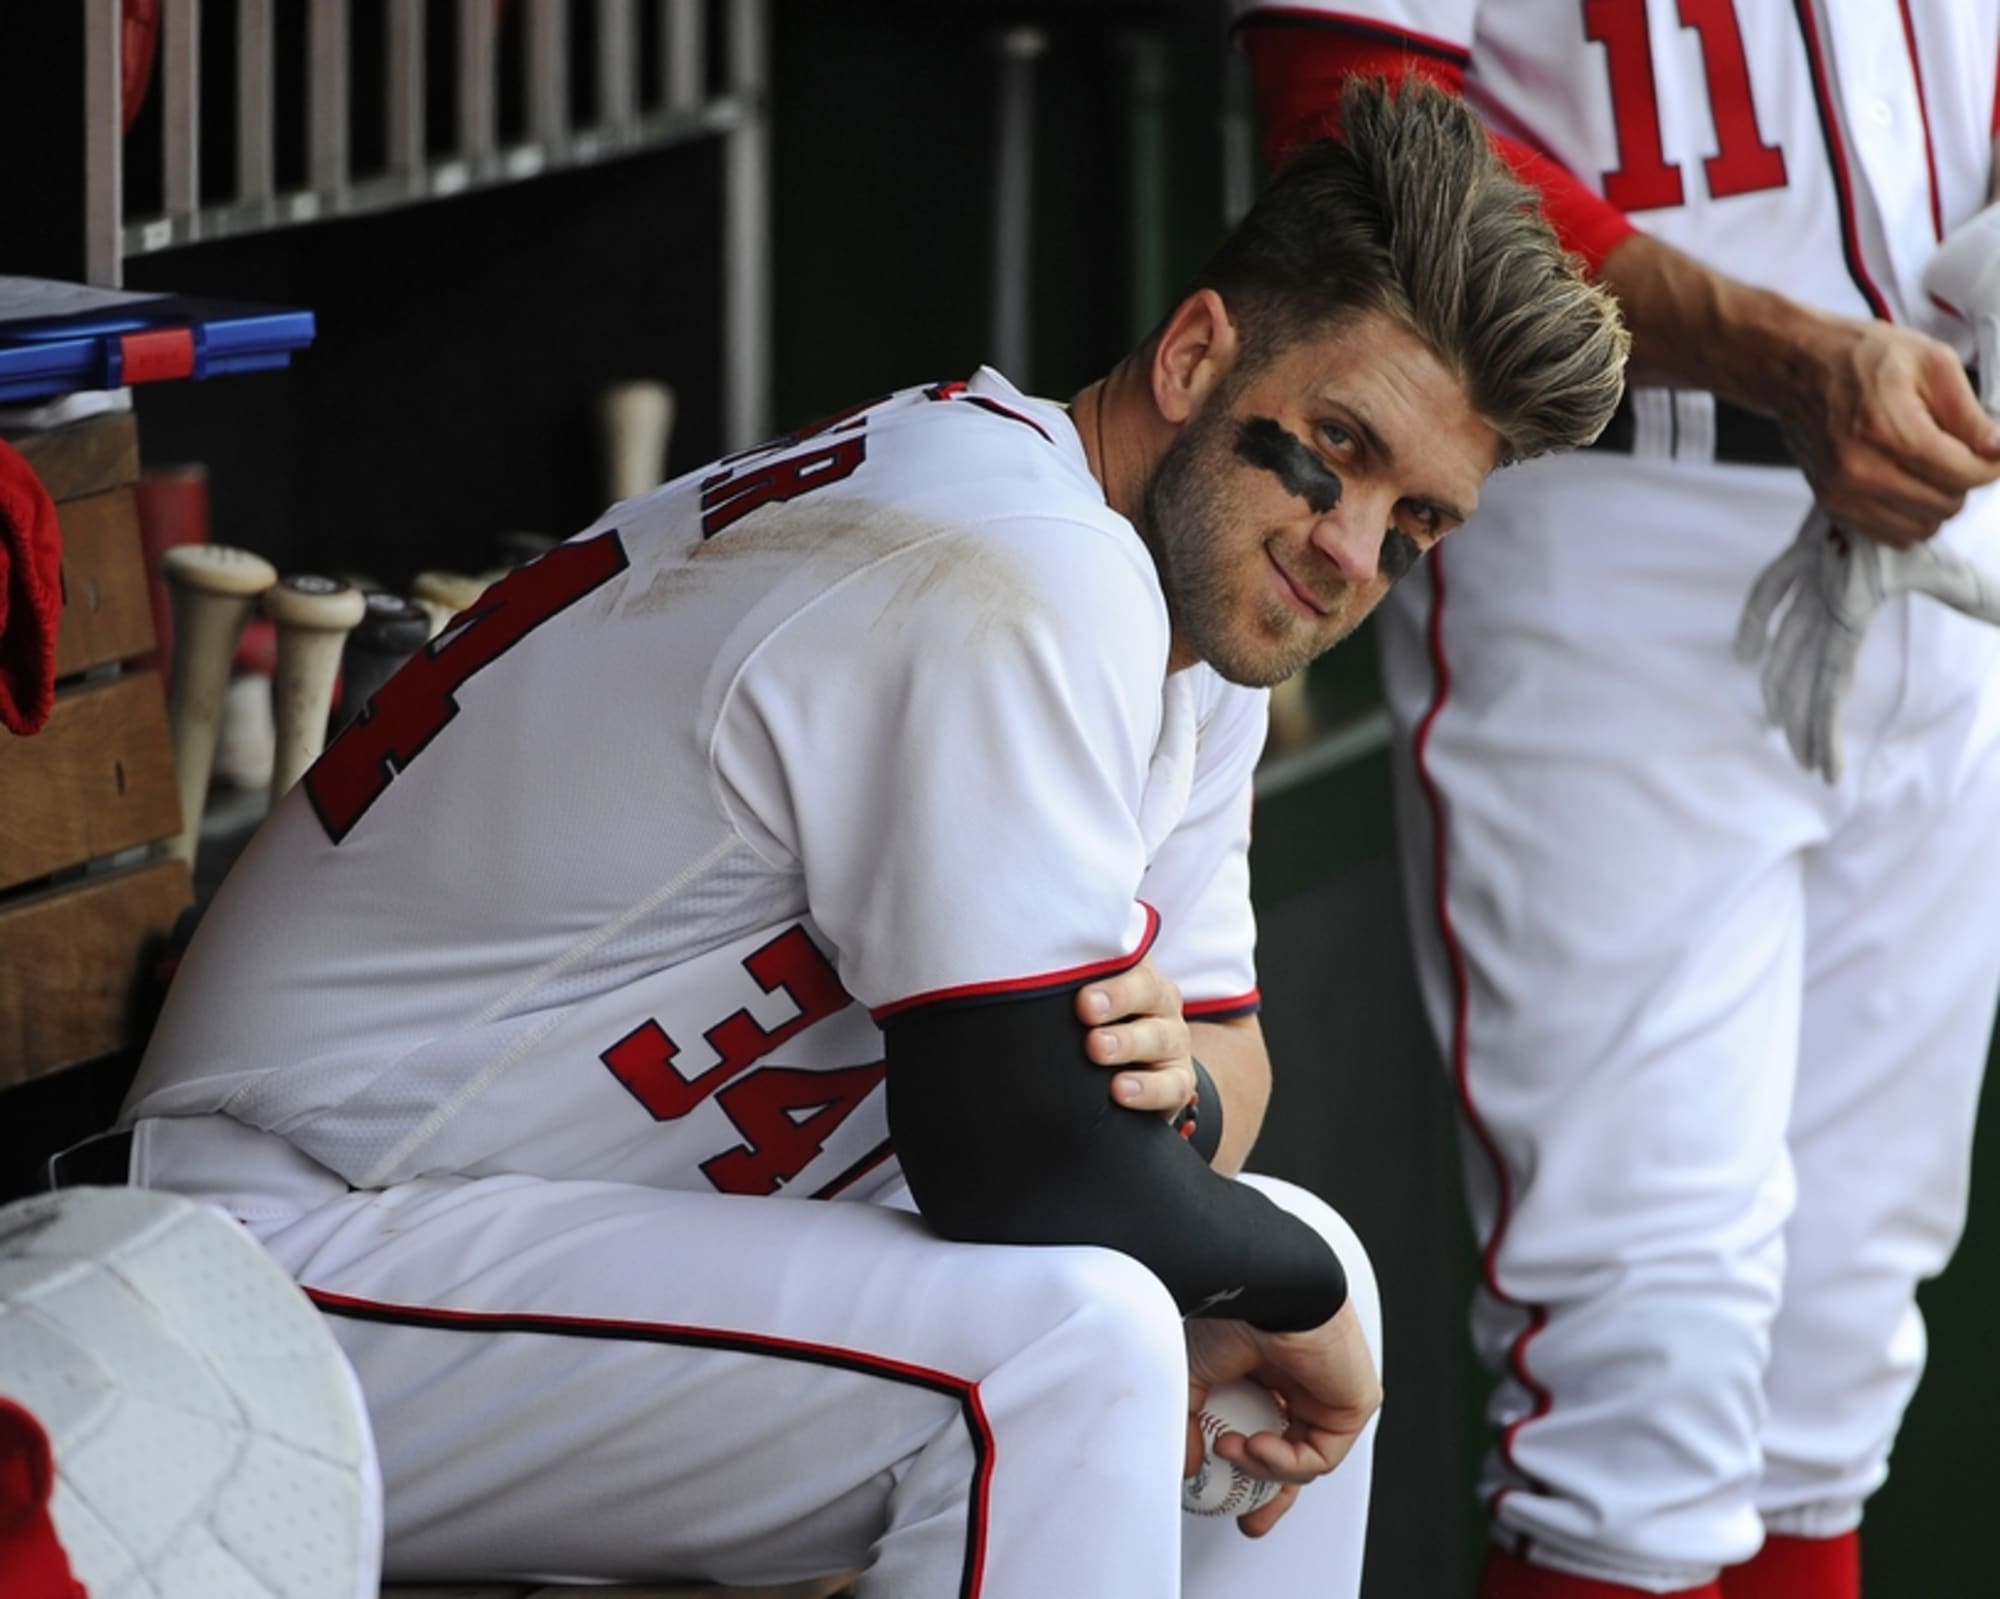 Nationals Fan Has Perfect Edit for All Bryce Harper Jerseys After